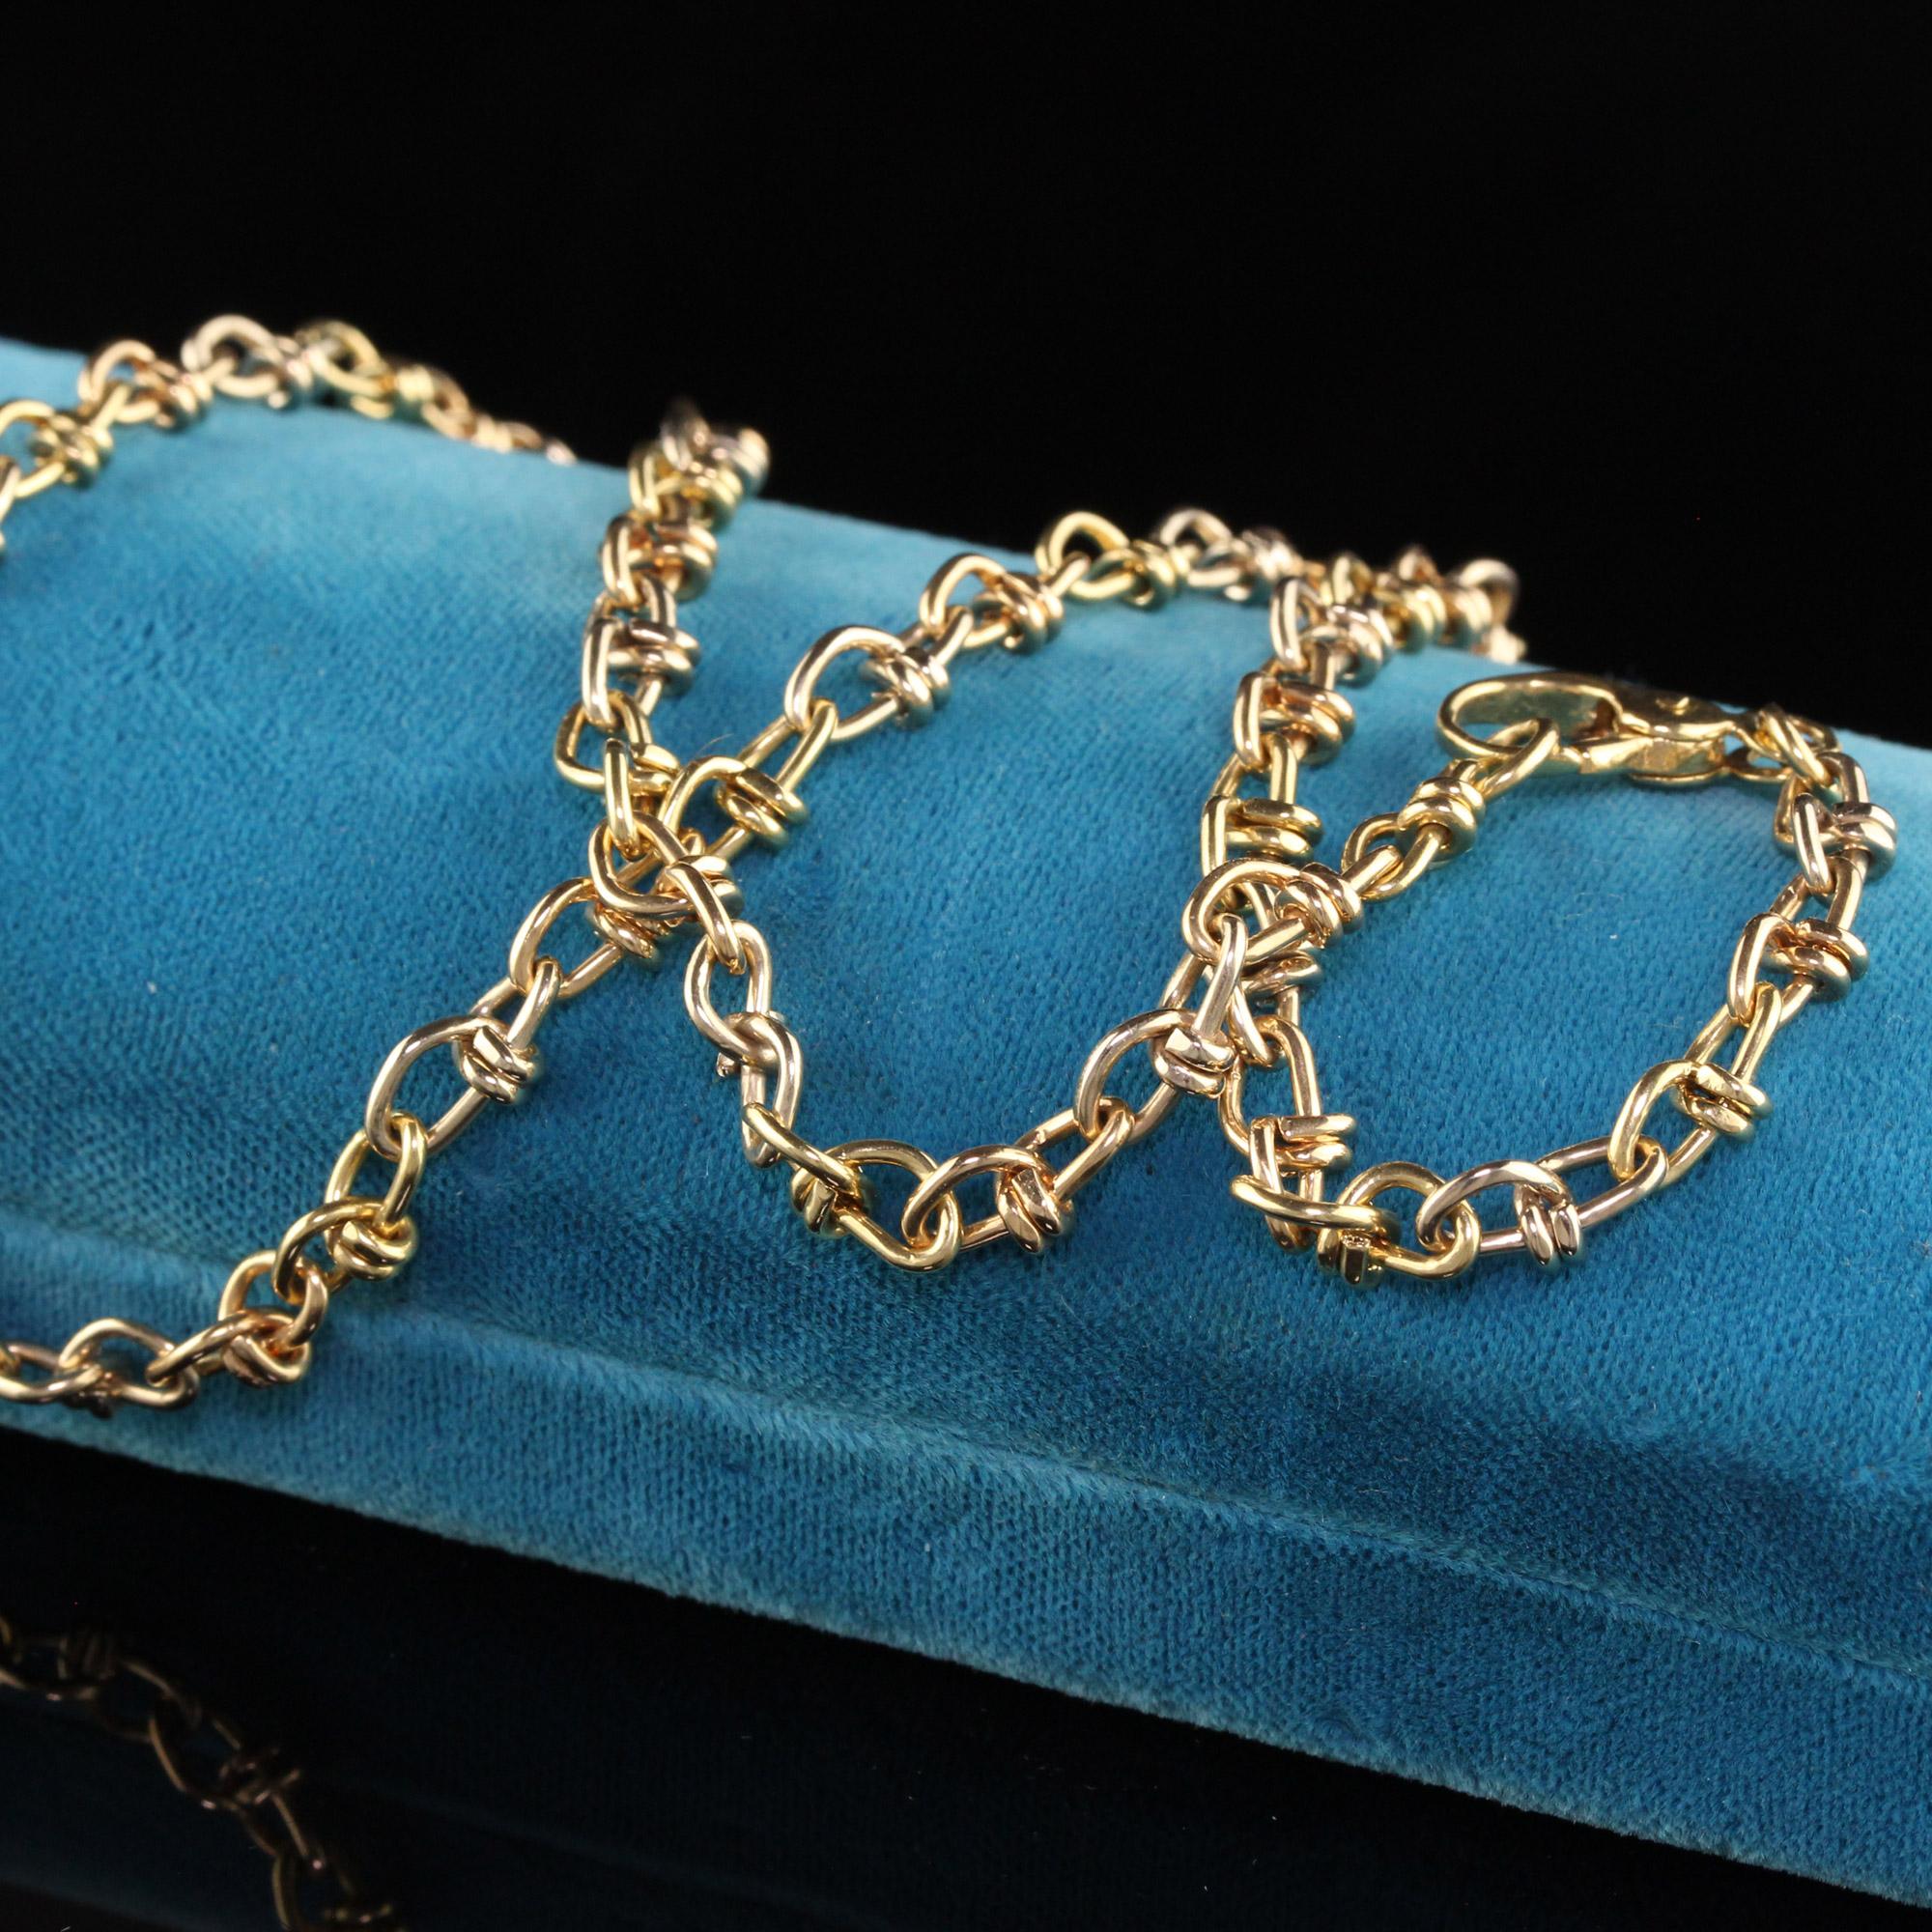 Beautiful Vintage Estate 18K Yellow Gold Twist Link Chain Necklace. This beautiful chain is crafted in 18K yellow gold and has a beautiful twist chain link.

Item #N0075

Metal: 18K Yellow Gold

Weight: 21.4 Grams

Size: 16 inches